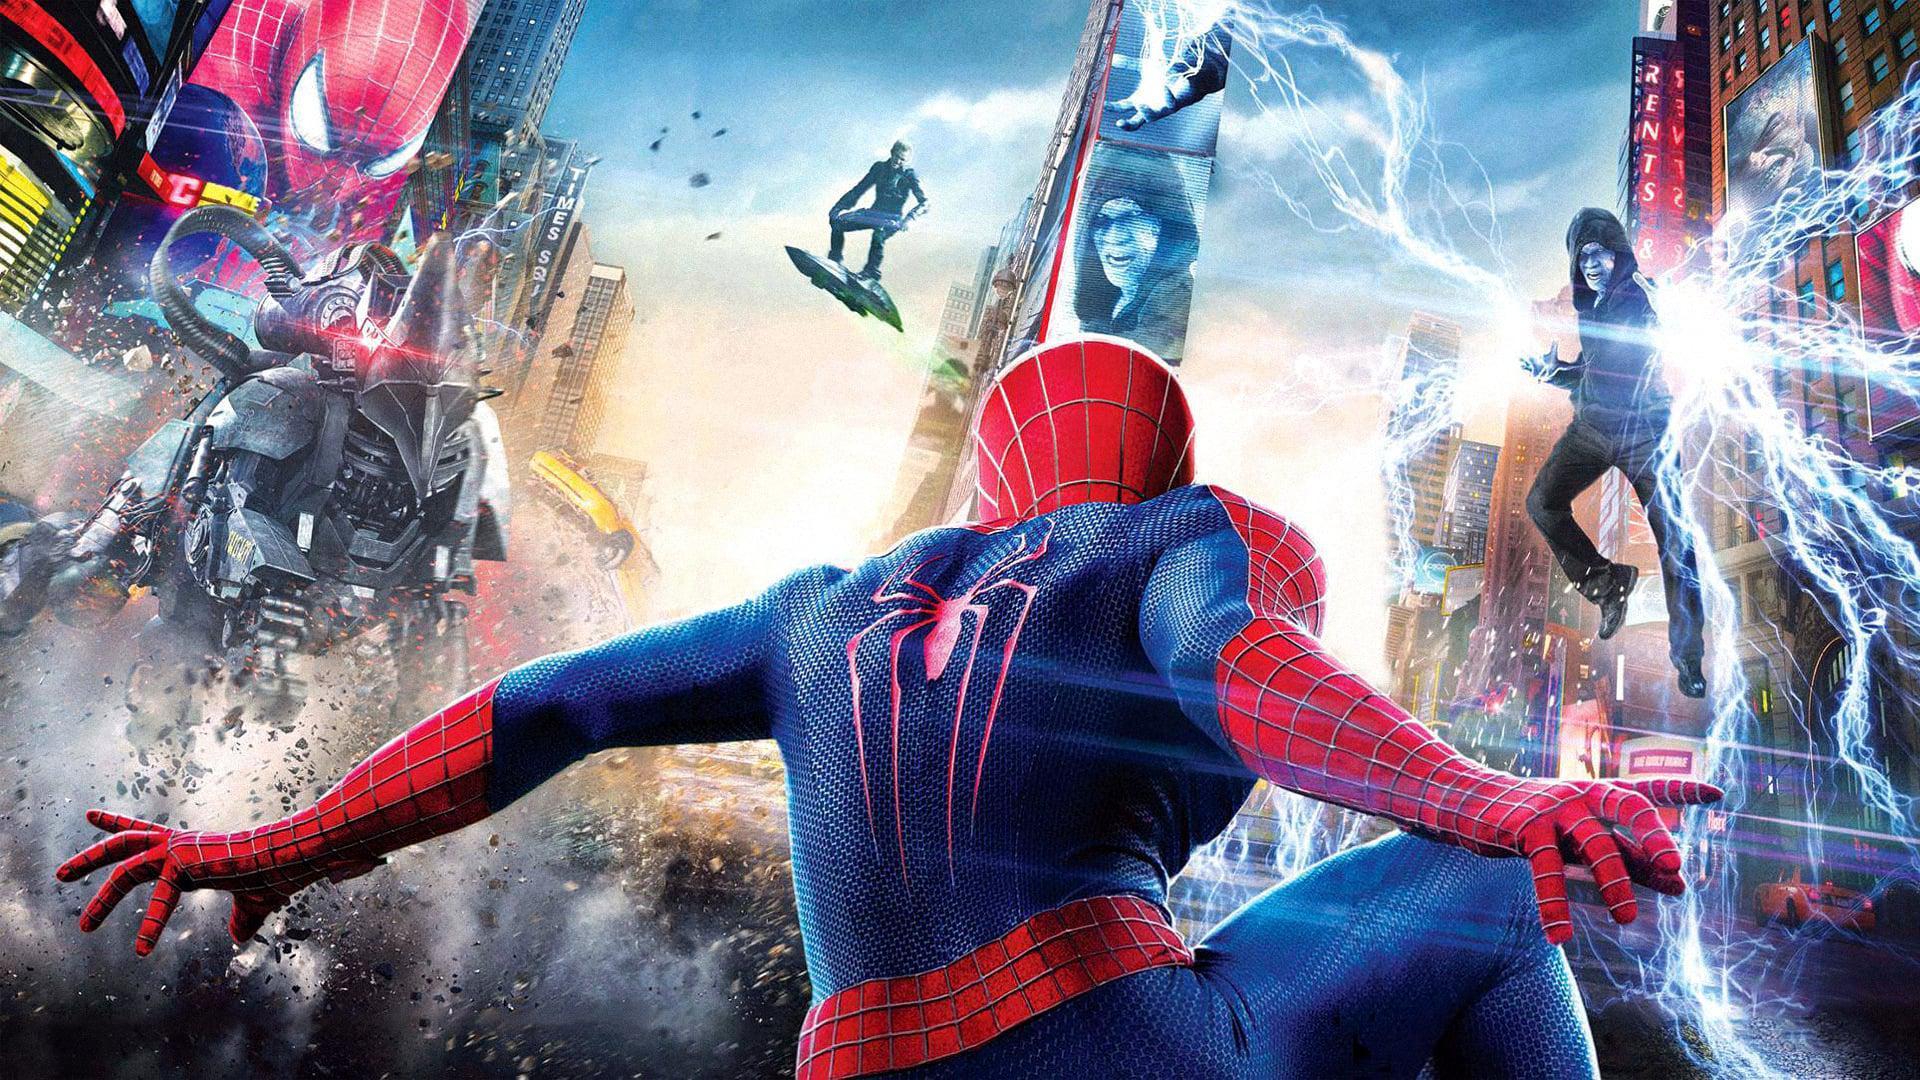 Backdrop Image for The Amazing Spider-Man 2